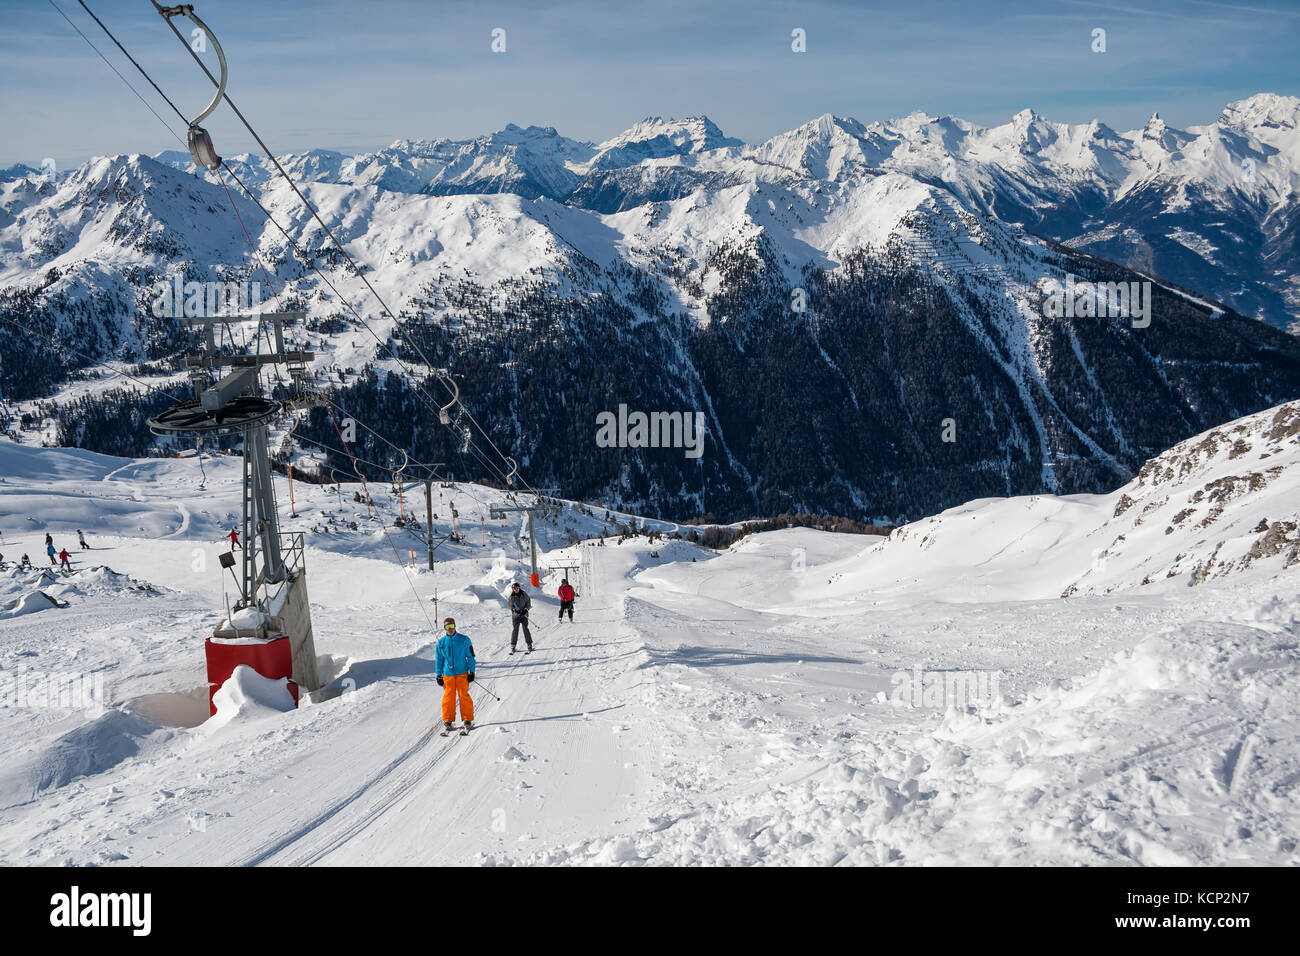 4 VALLEY, SWITZERLAND - FEBRUARY 04, 2010: Ski resort in the Swiss Alps. Skiers ascend on rope tow up Stock Photo